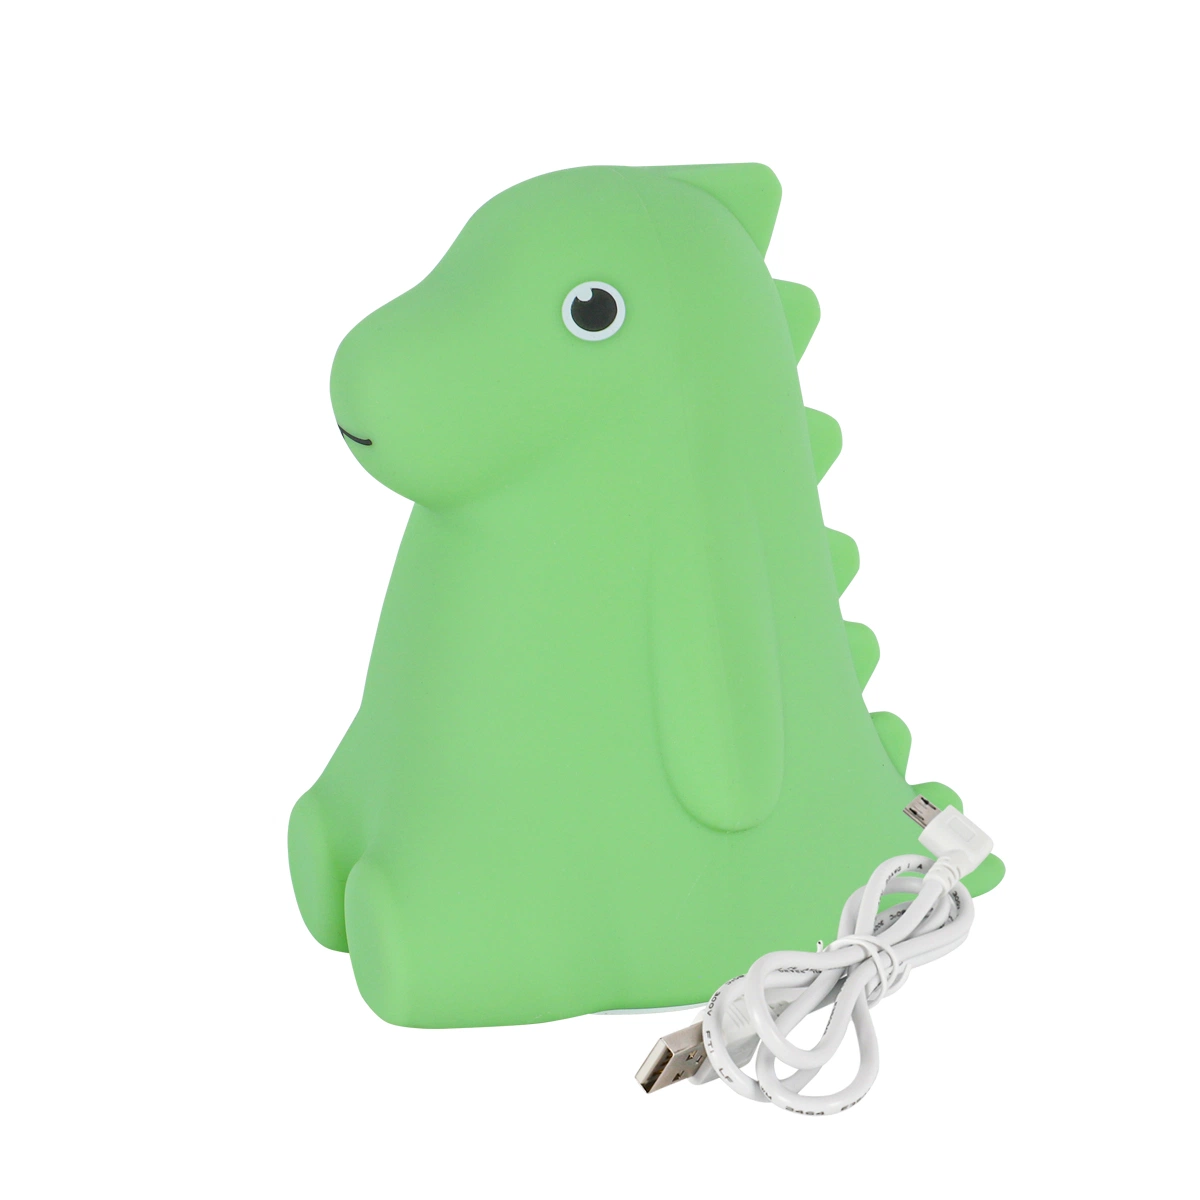 Super Cute 3.7V 20lm Silicon Cartoon Animal Shape Dinosaur Bed Lamp Night Light Product with CE RoHS